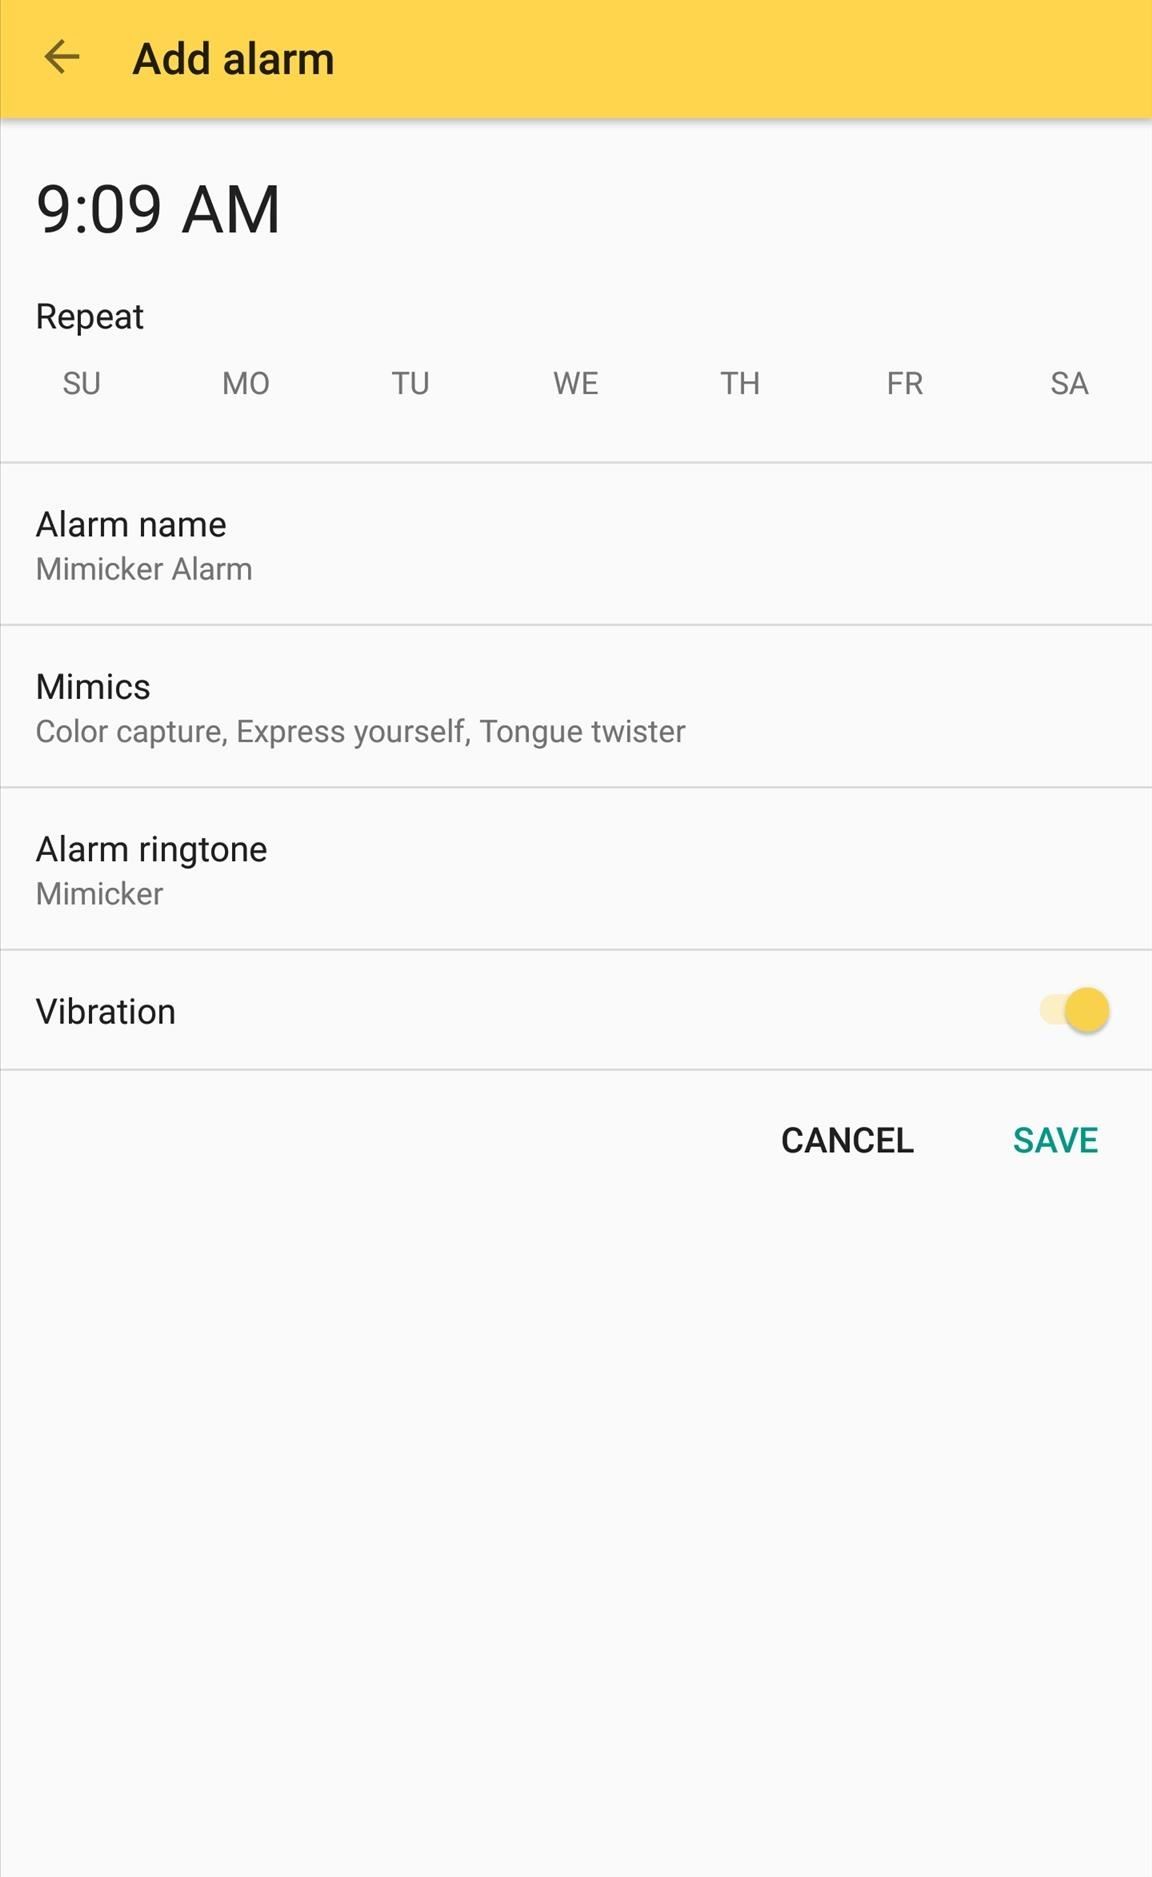 Microsoft's Android Alarm App Has a Weird New Way to Get You Out of Bed in the Morning